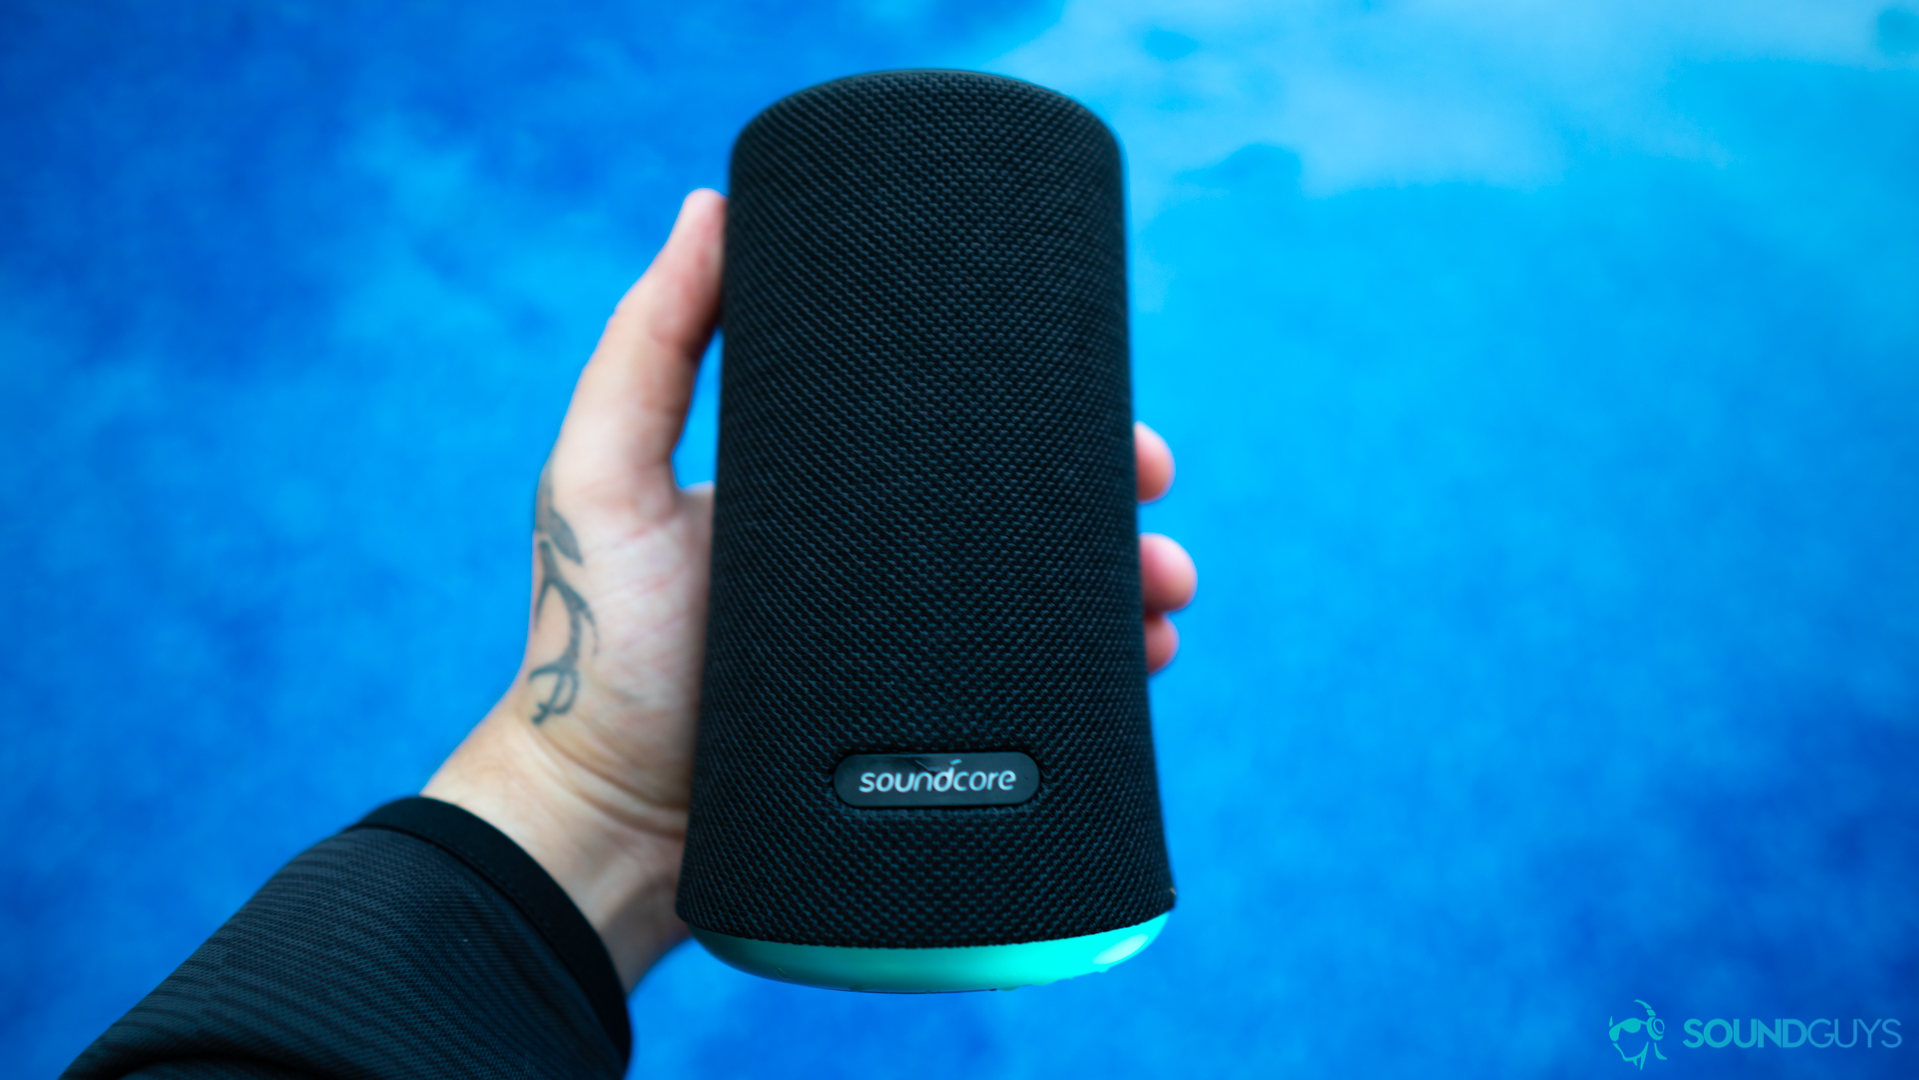 Holding the Soundcore Flare over the pool.